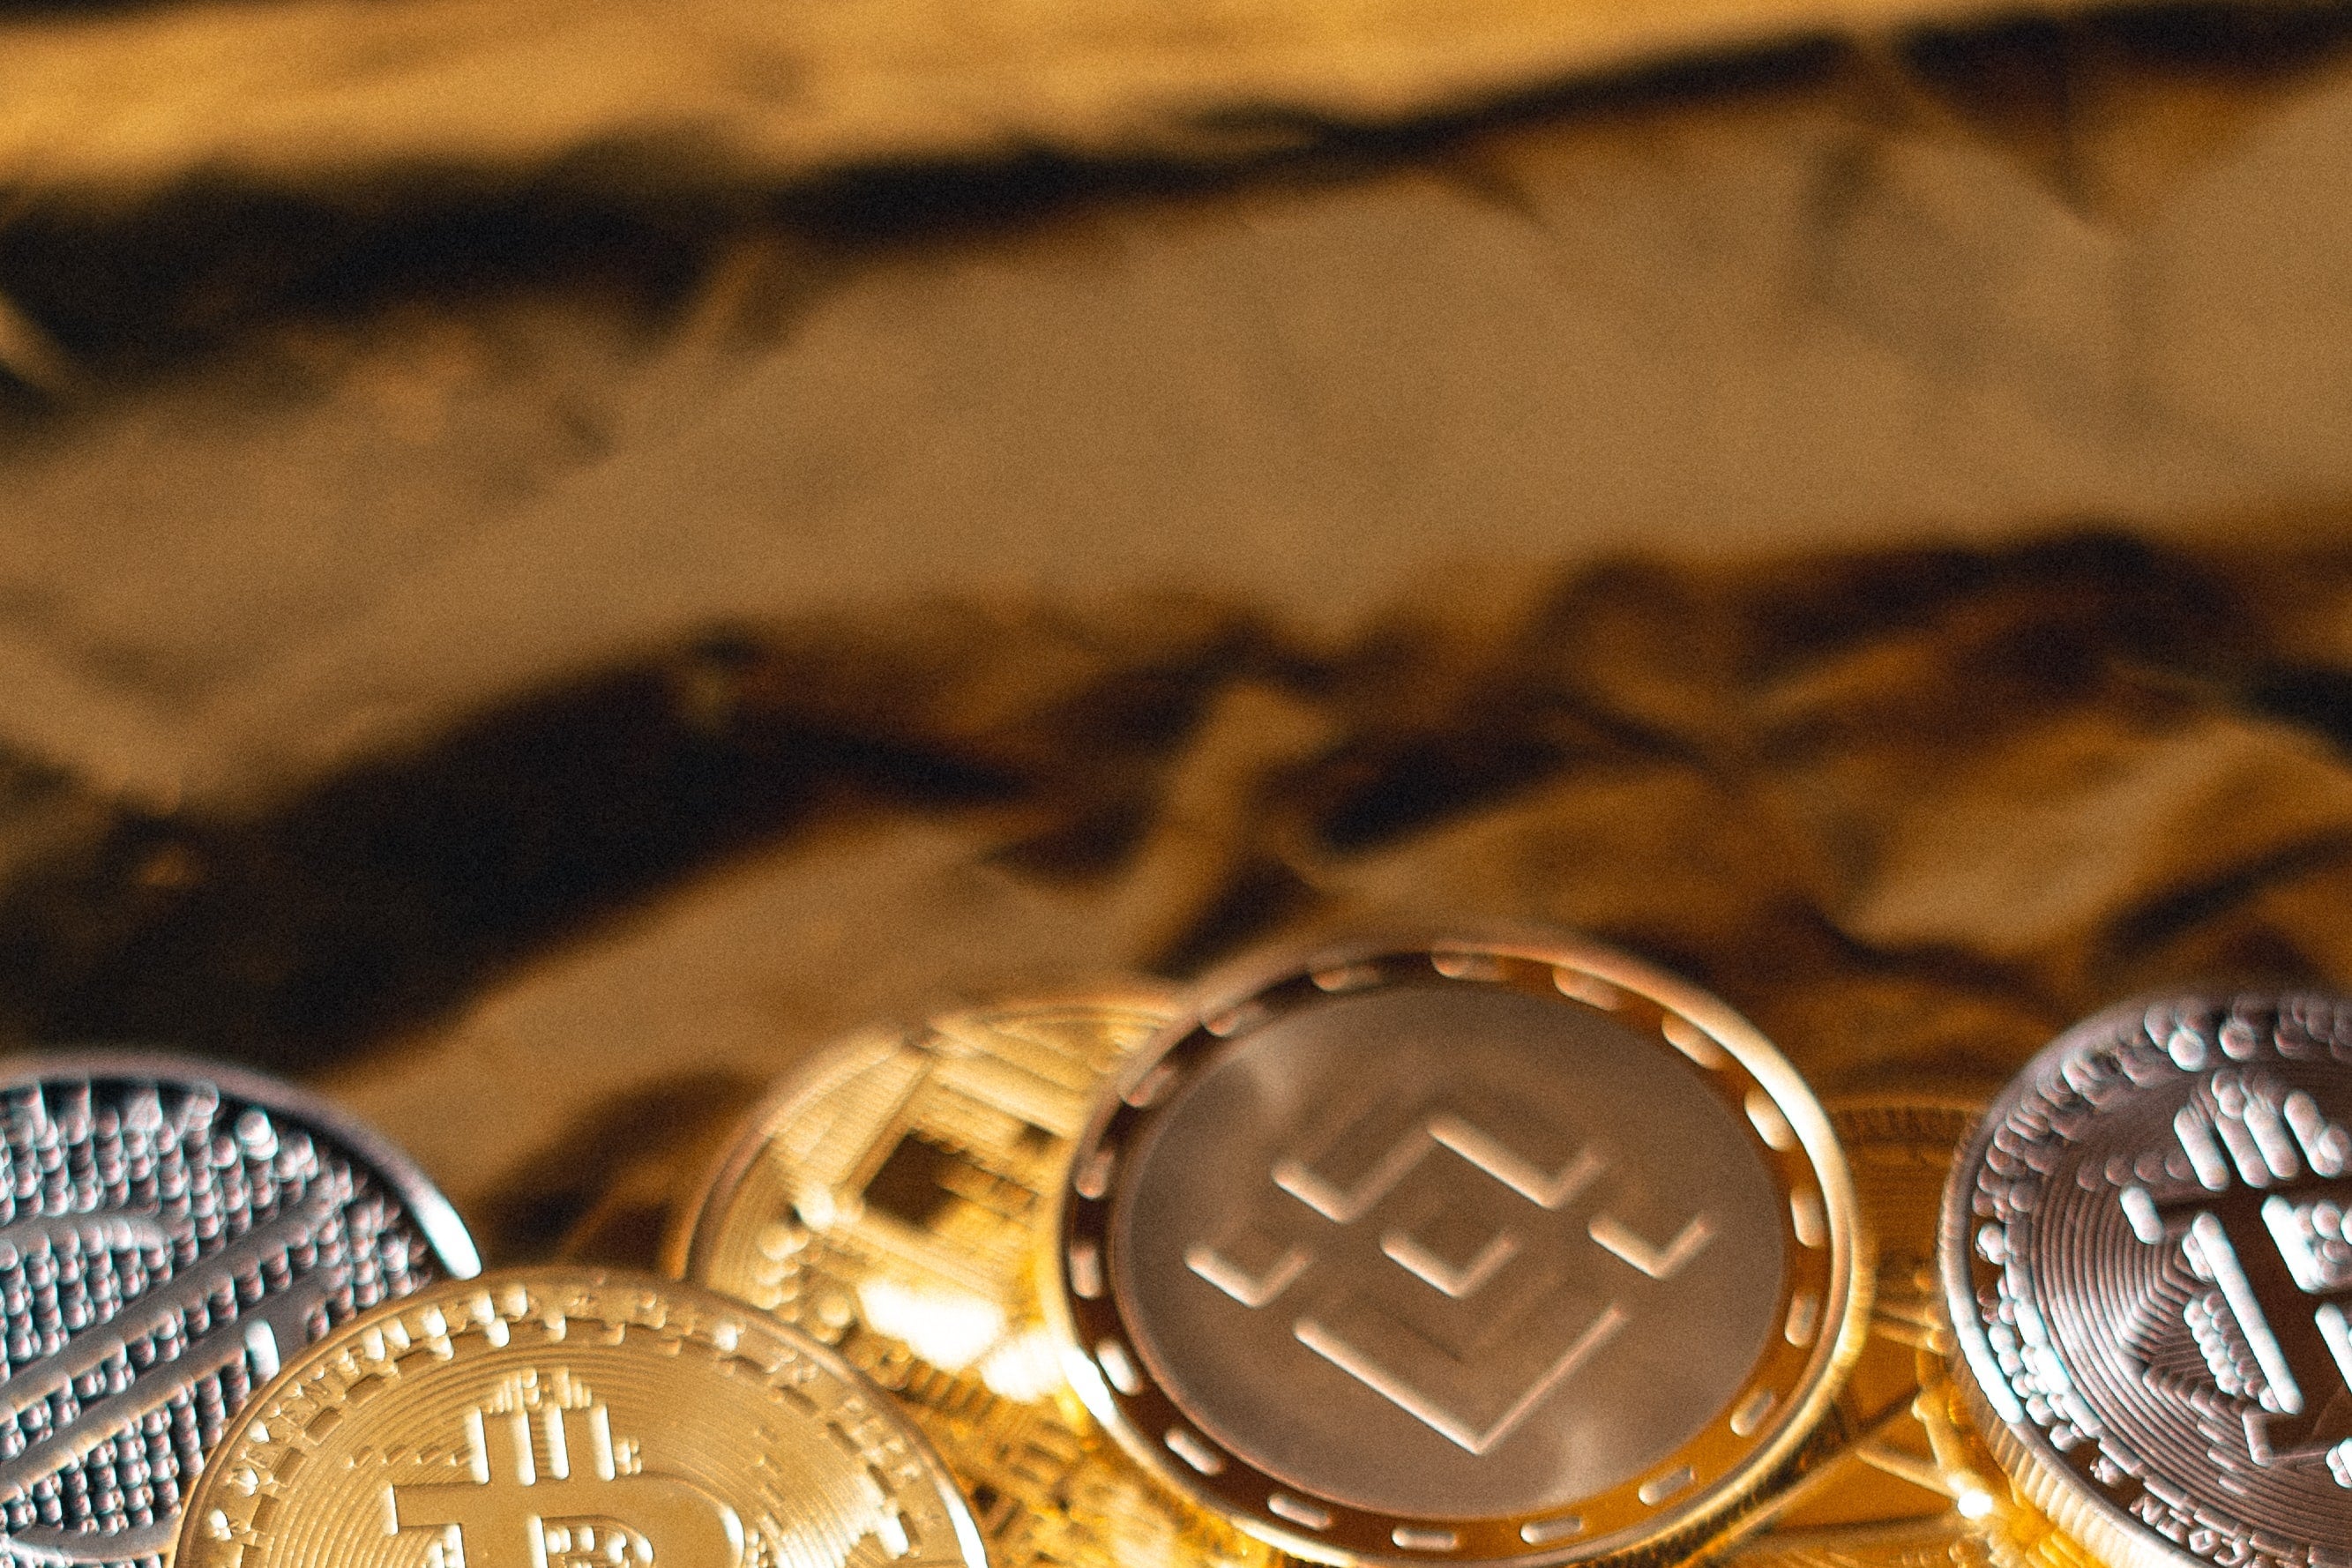 Gold coins with the logos of cryptocurrencies like Bitcoin and Ethereum.